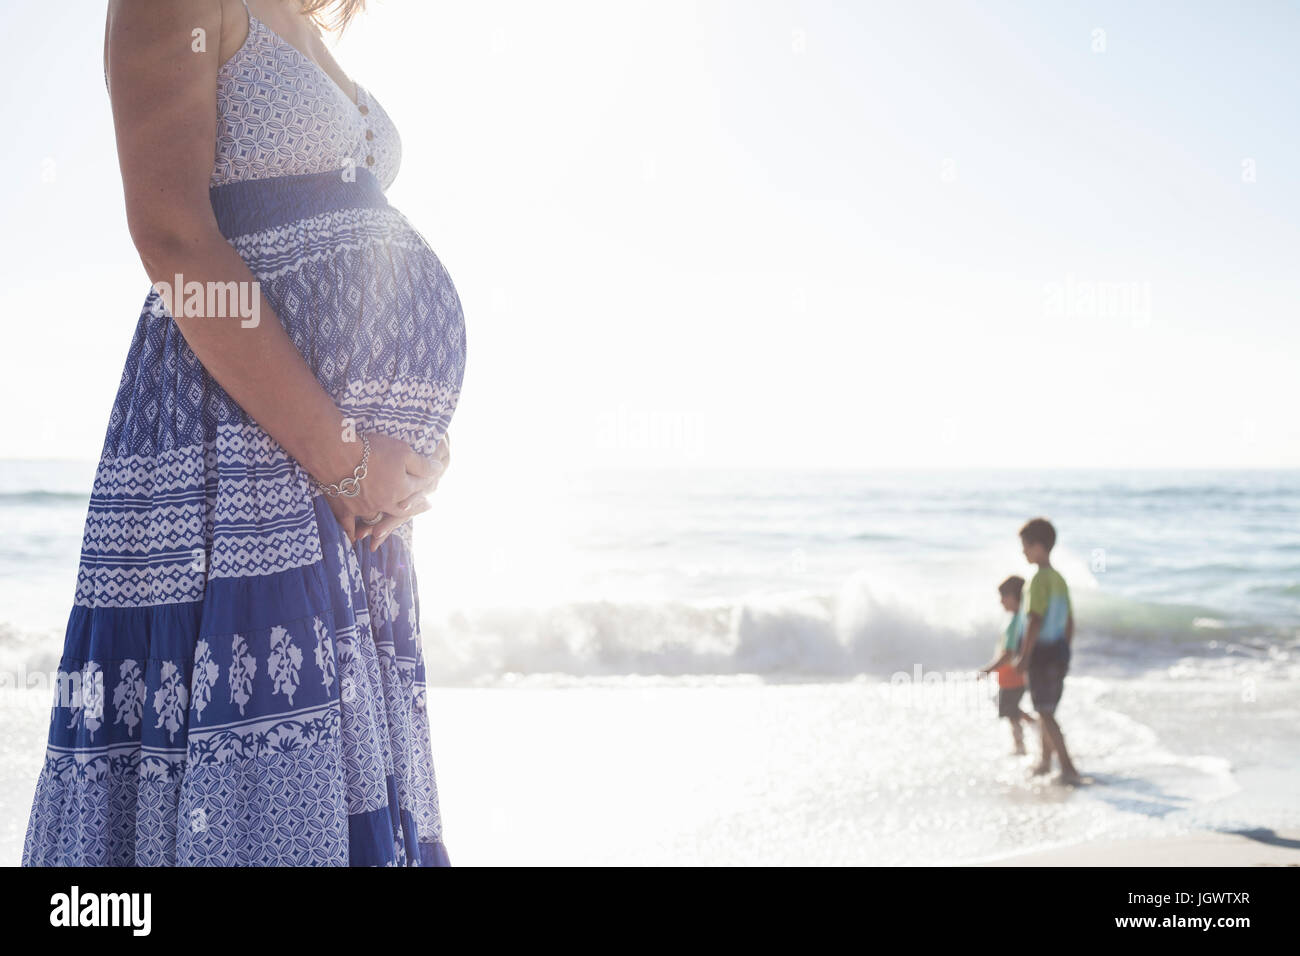 Pregnant woman on beach, Cape Town, South Africa Stock Photo